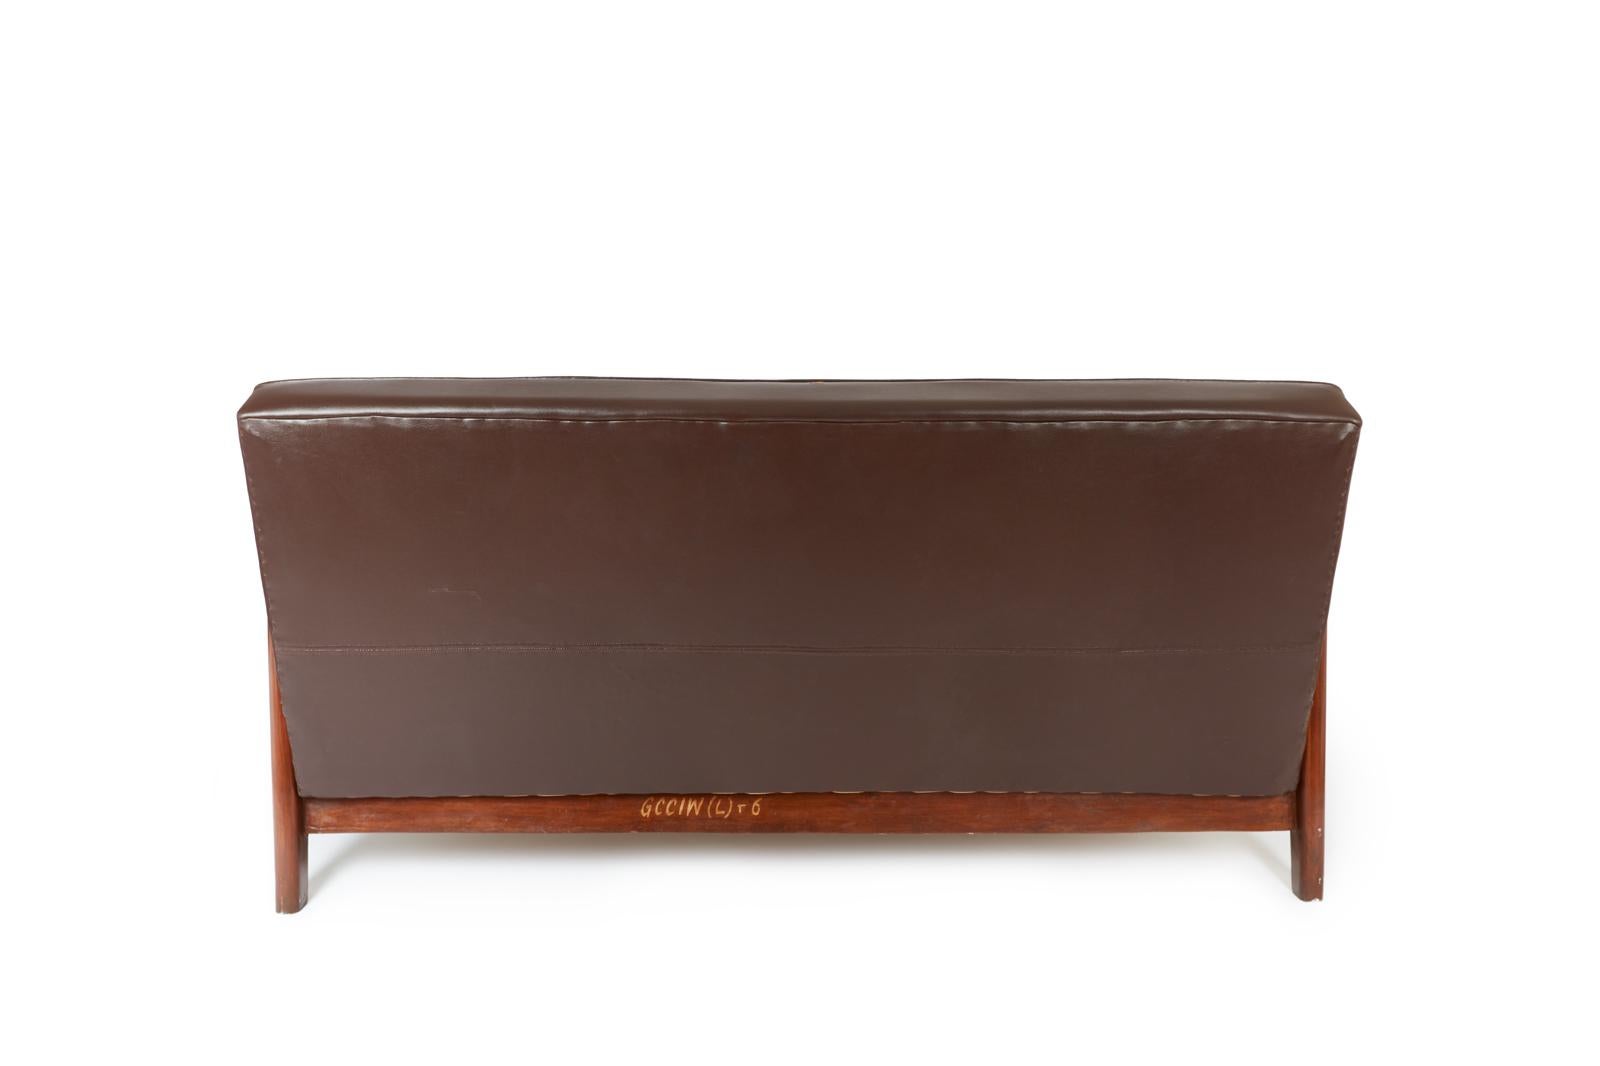 Rare sofa in teak and faux dark brown leather from the High Court of Chandigarh (Sector 1, Capitol Complex) designed by Pierre Jeanneret and Le Corbusier. 
This model has a slightly sloping backrest and a solid bridge structure. 
According to expert